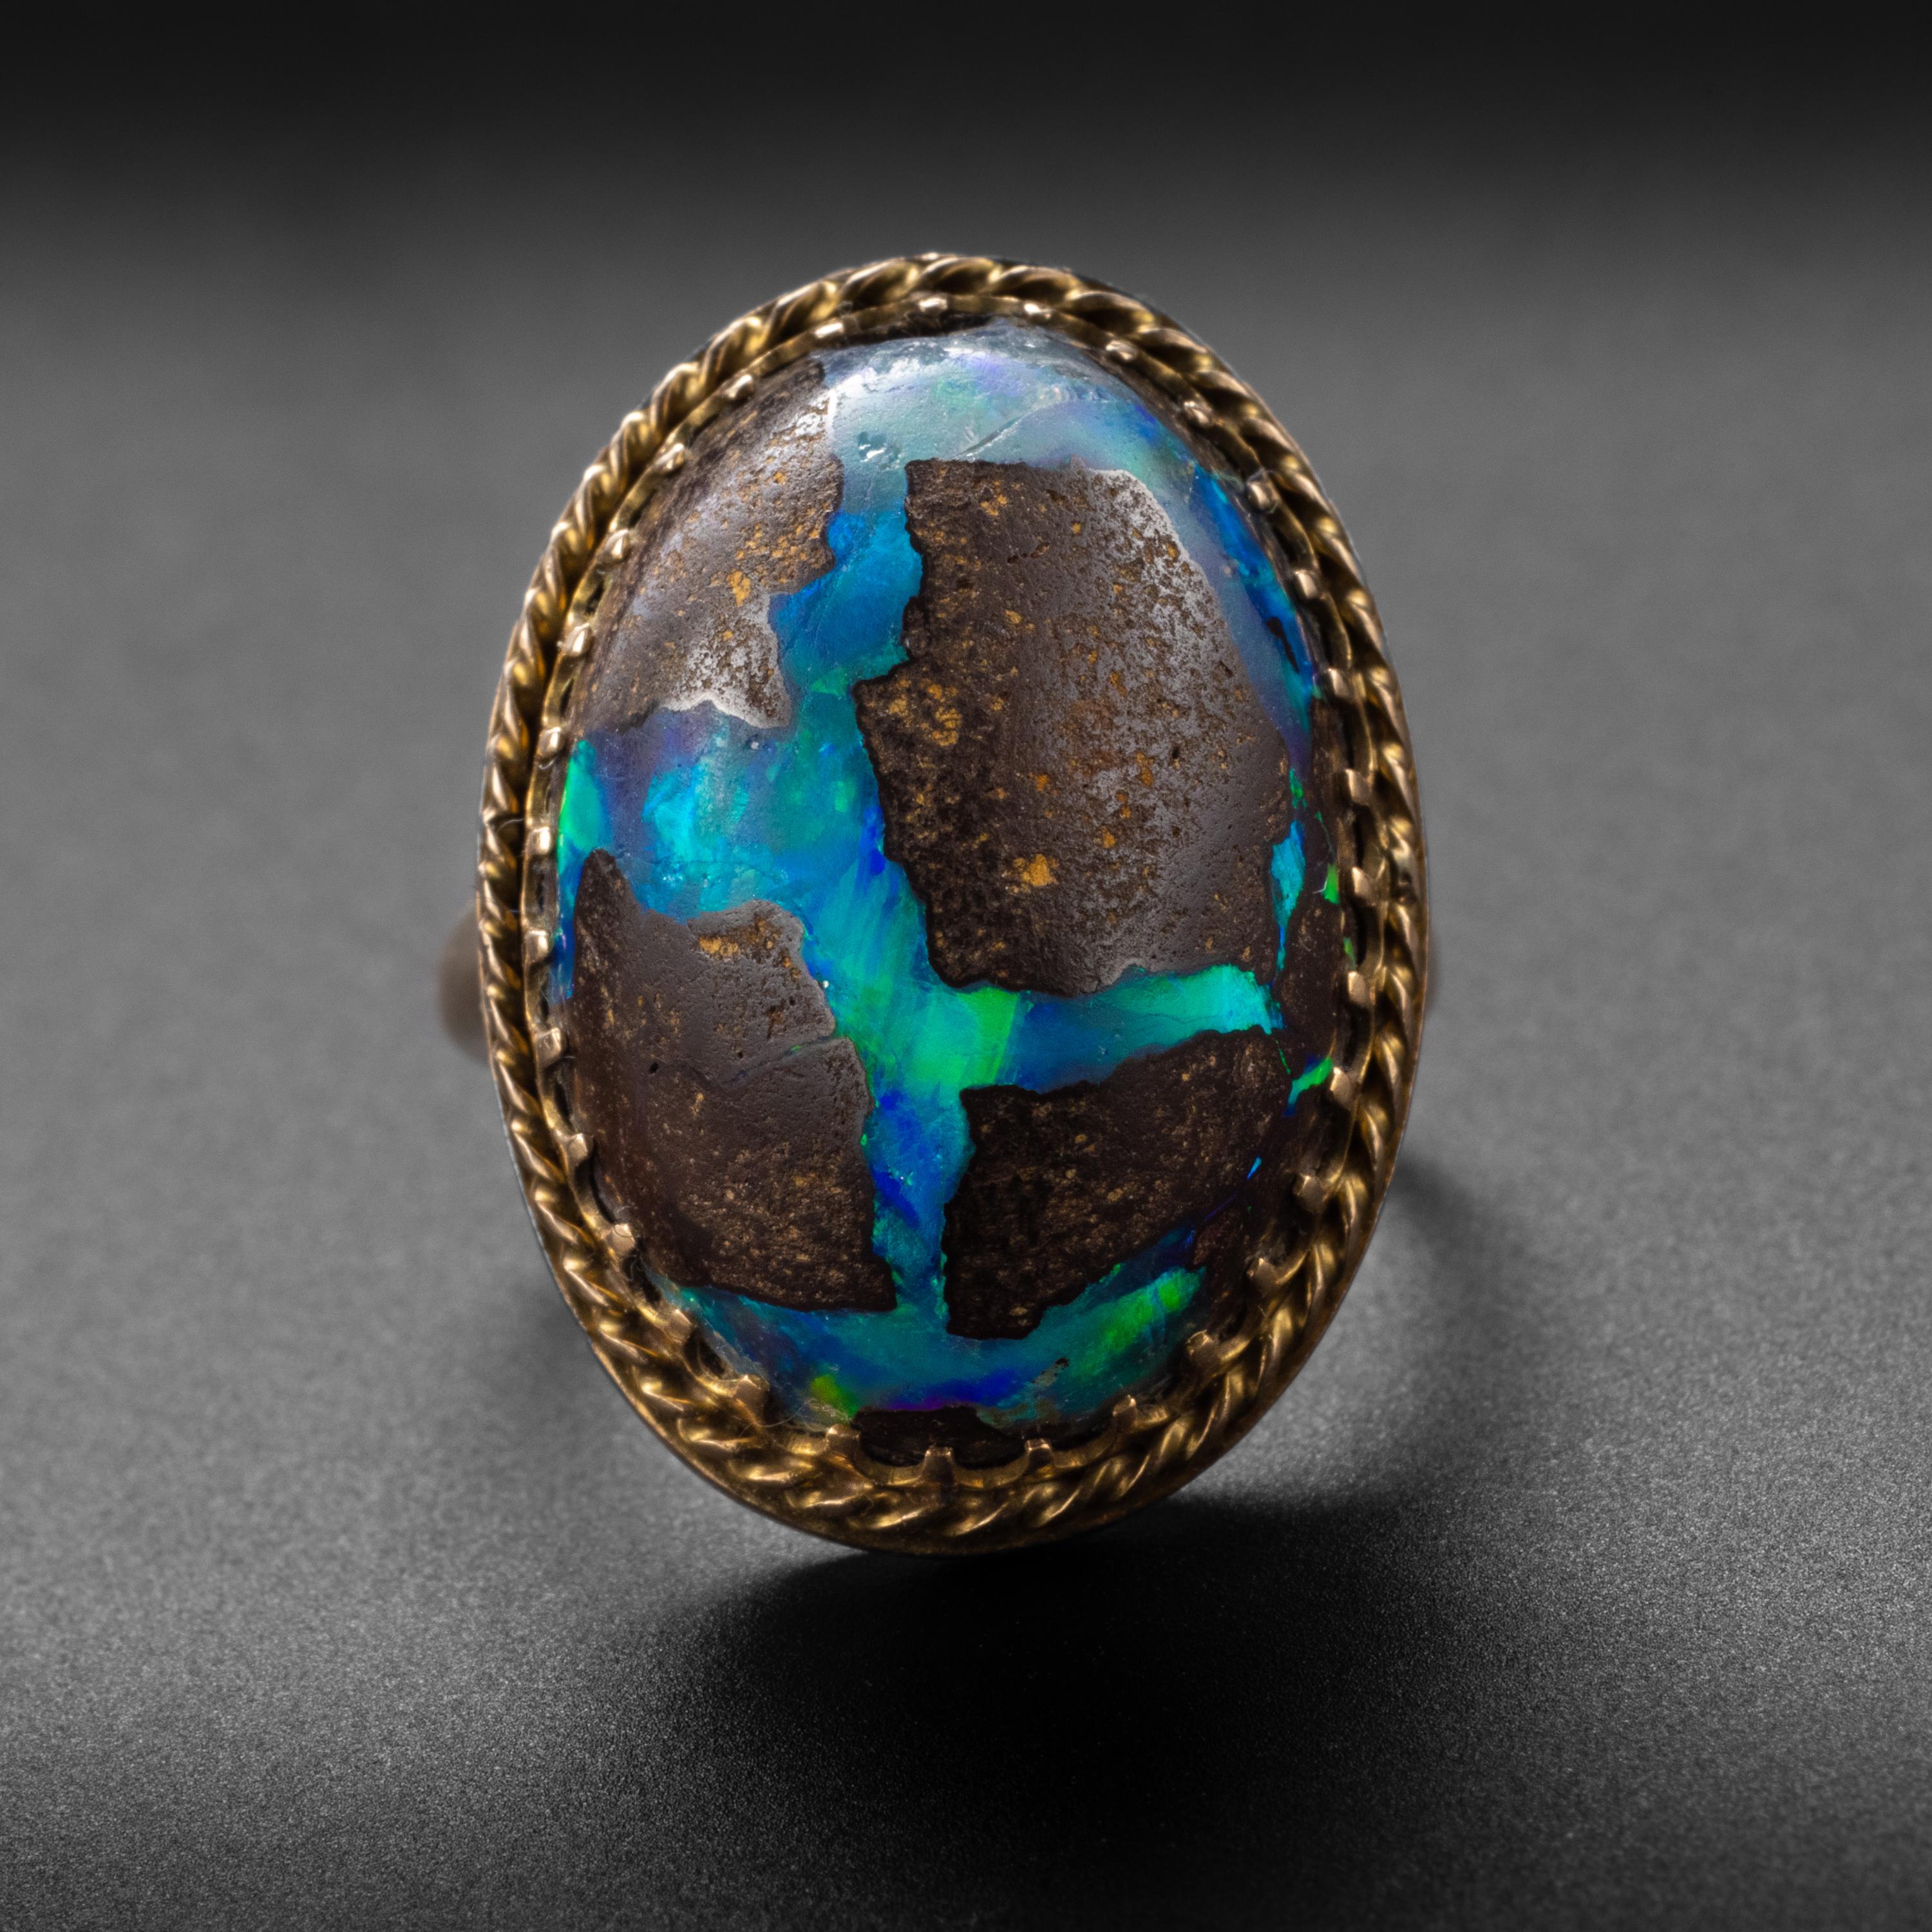 This boulder opal is a cabochon of dark brown ironstone struck by lighting bolts of brilliant blue and green. Boulder opals from Australia -like the one you see in this ring from the 1940s- are the most highly prized.

What I love about this boulder